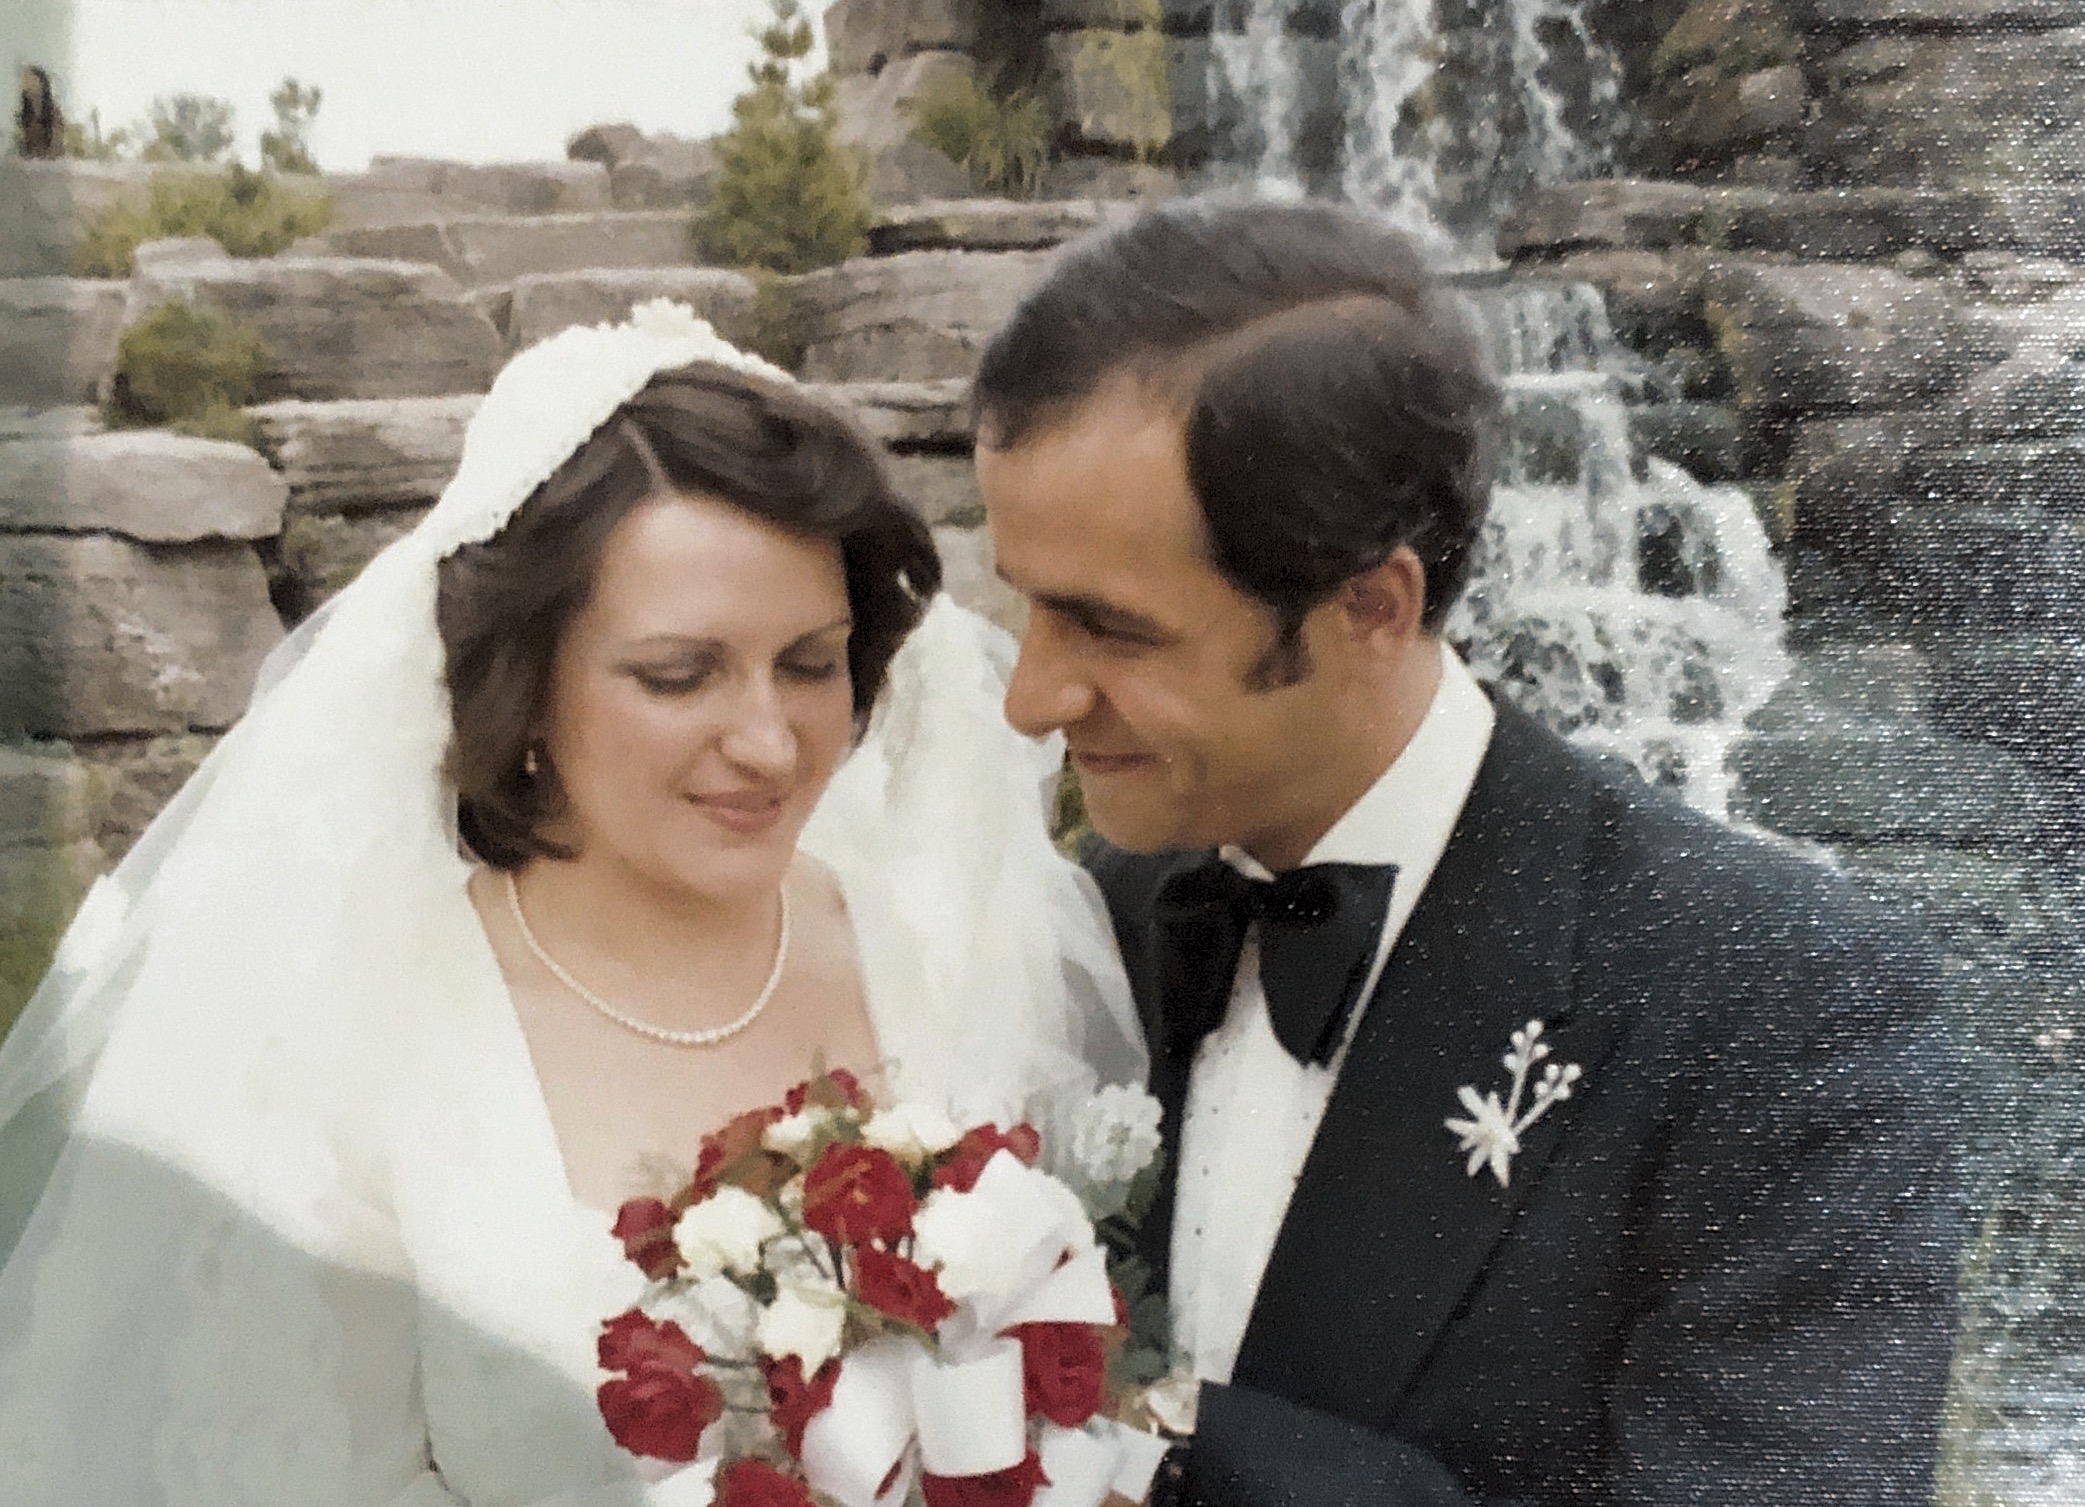 Happy Anniversary Mary & Soto
August 17, 1975 - 2021